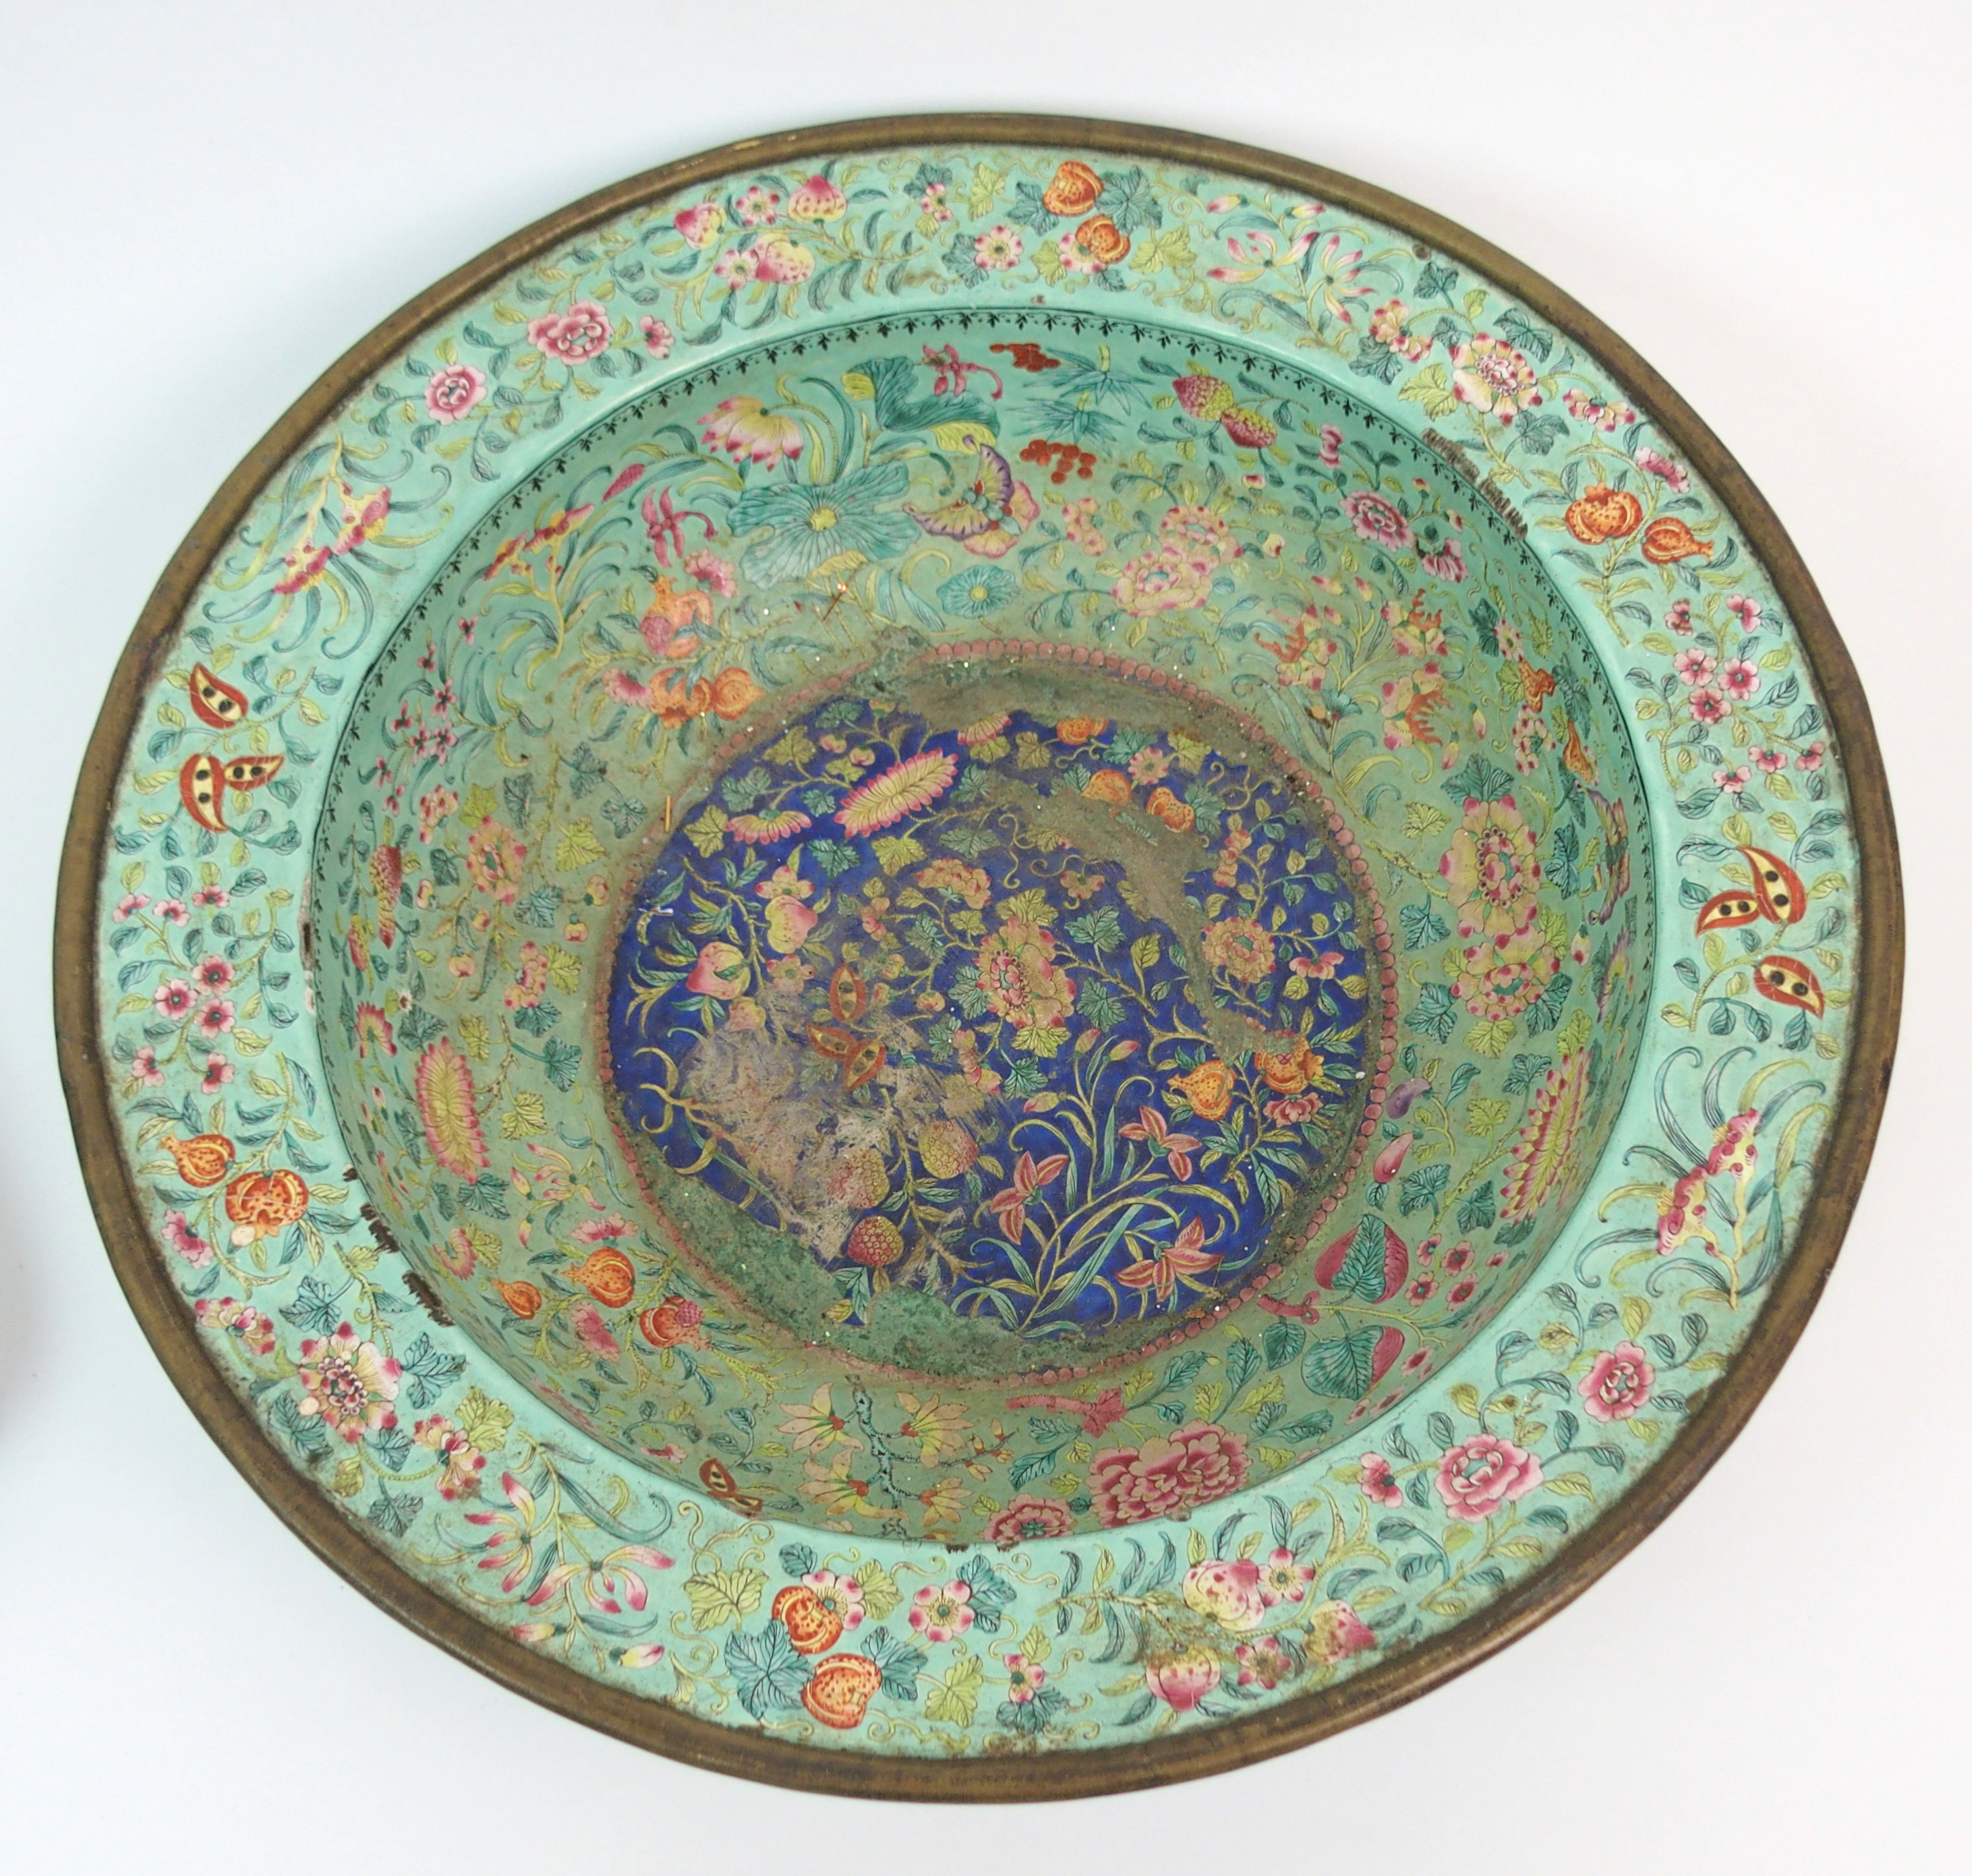 A CANTONESE ENAMEL WASH BASIN painted allover with fruit and flowers (damages), 42.5cm diameter, - Image 3 of 10